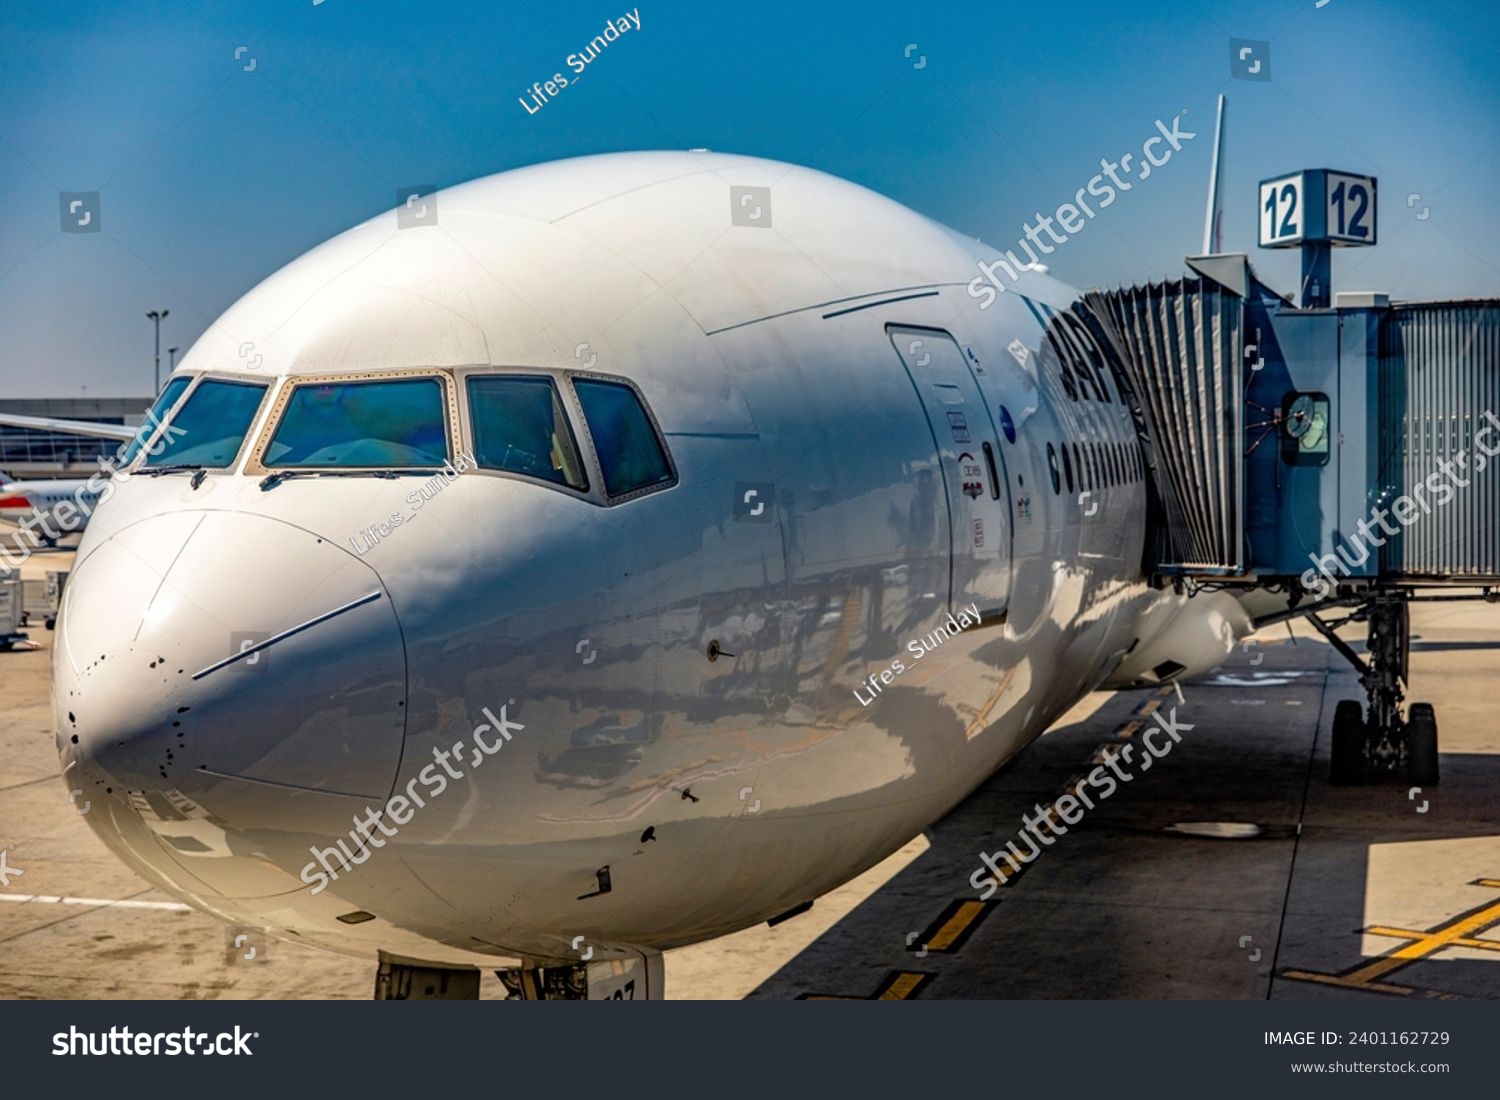 Beautiful image of an airline wide-body commercial jet parked at John F. Kennedy International Airport, where it is being loaded at gate 12 to begin a new journey on a new course. #2401162729